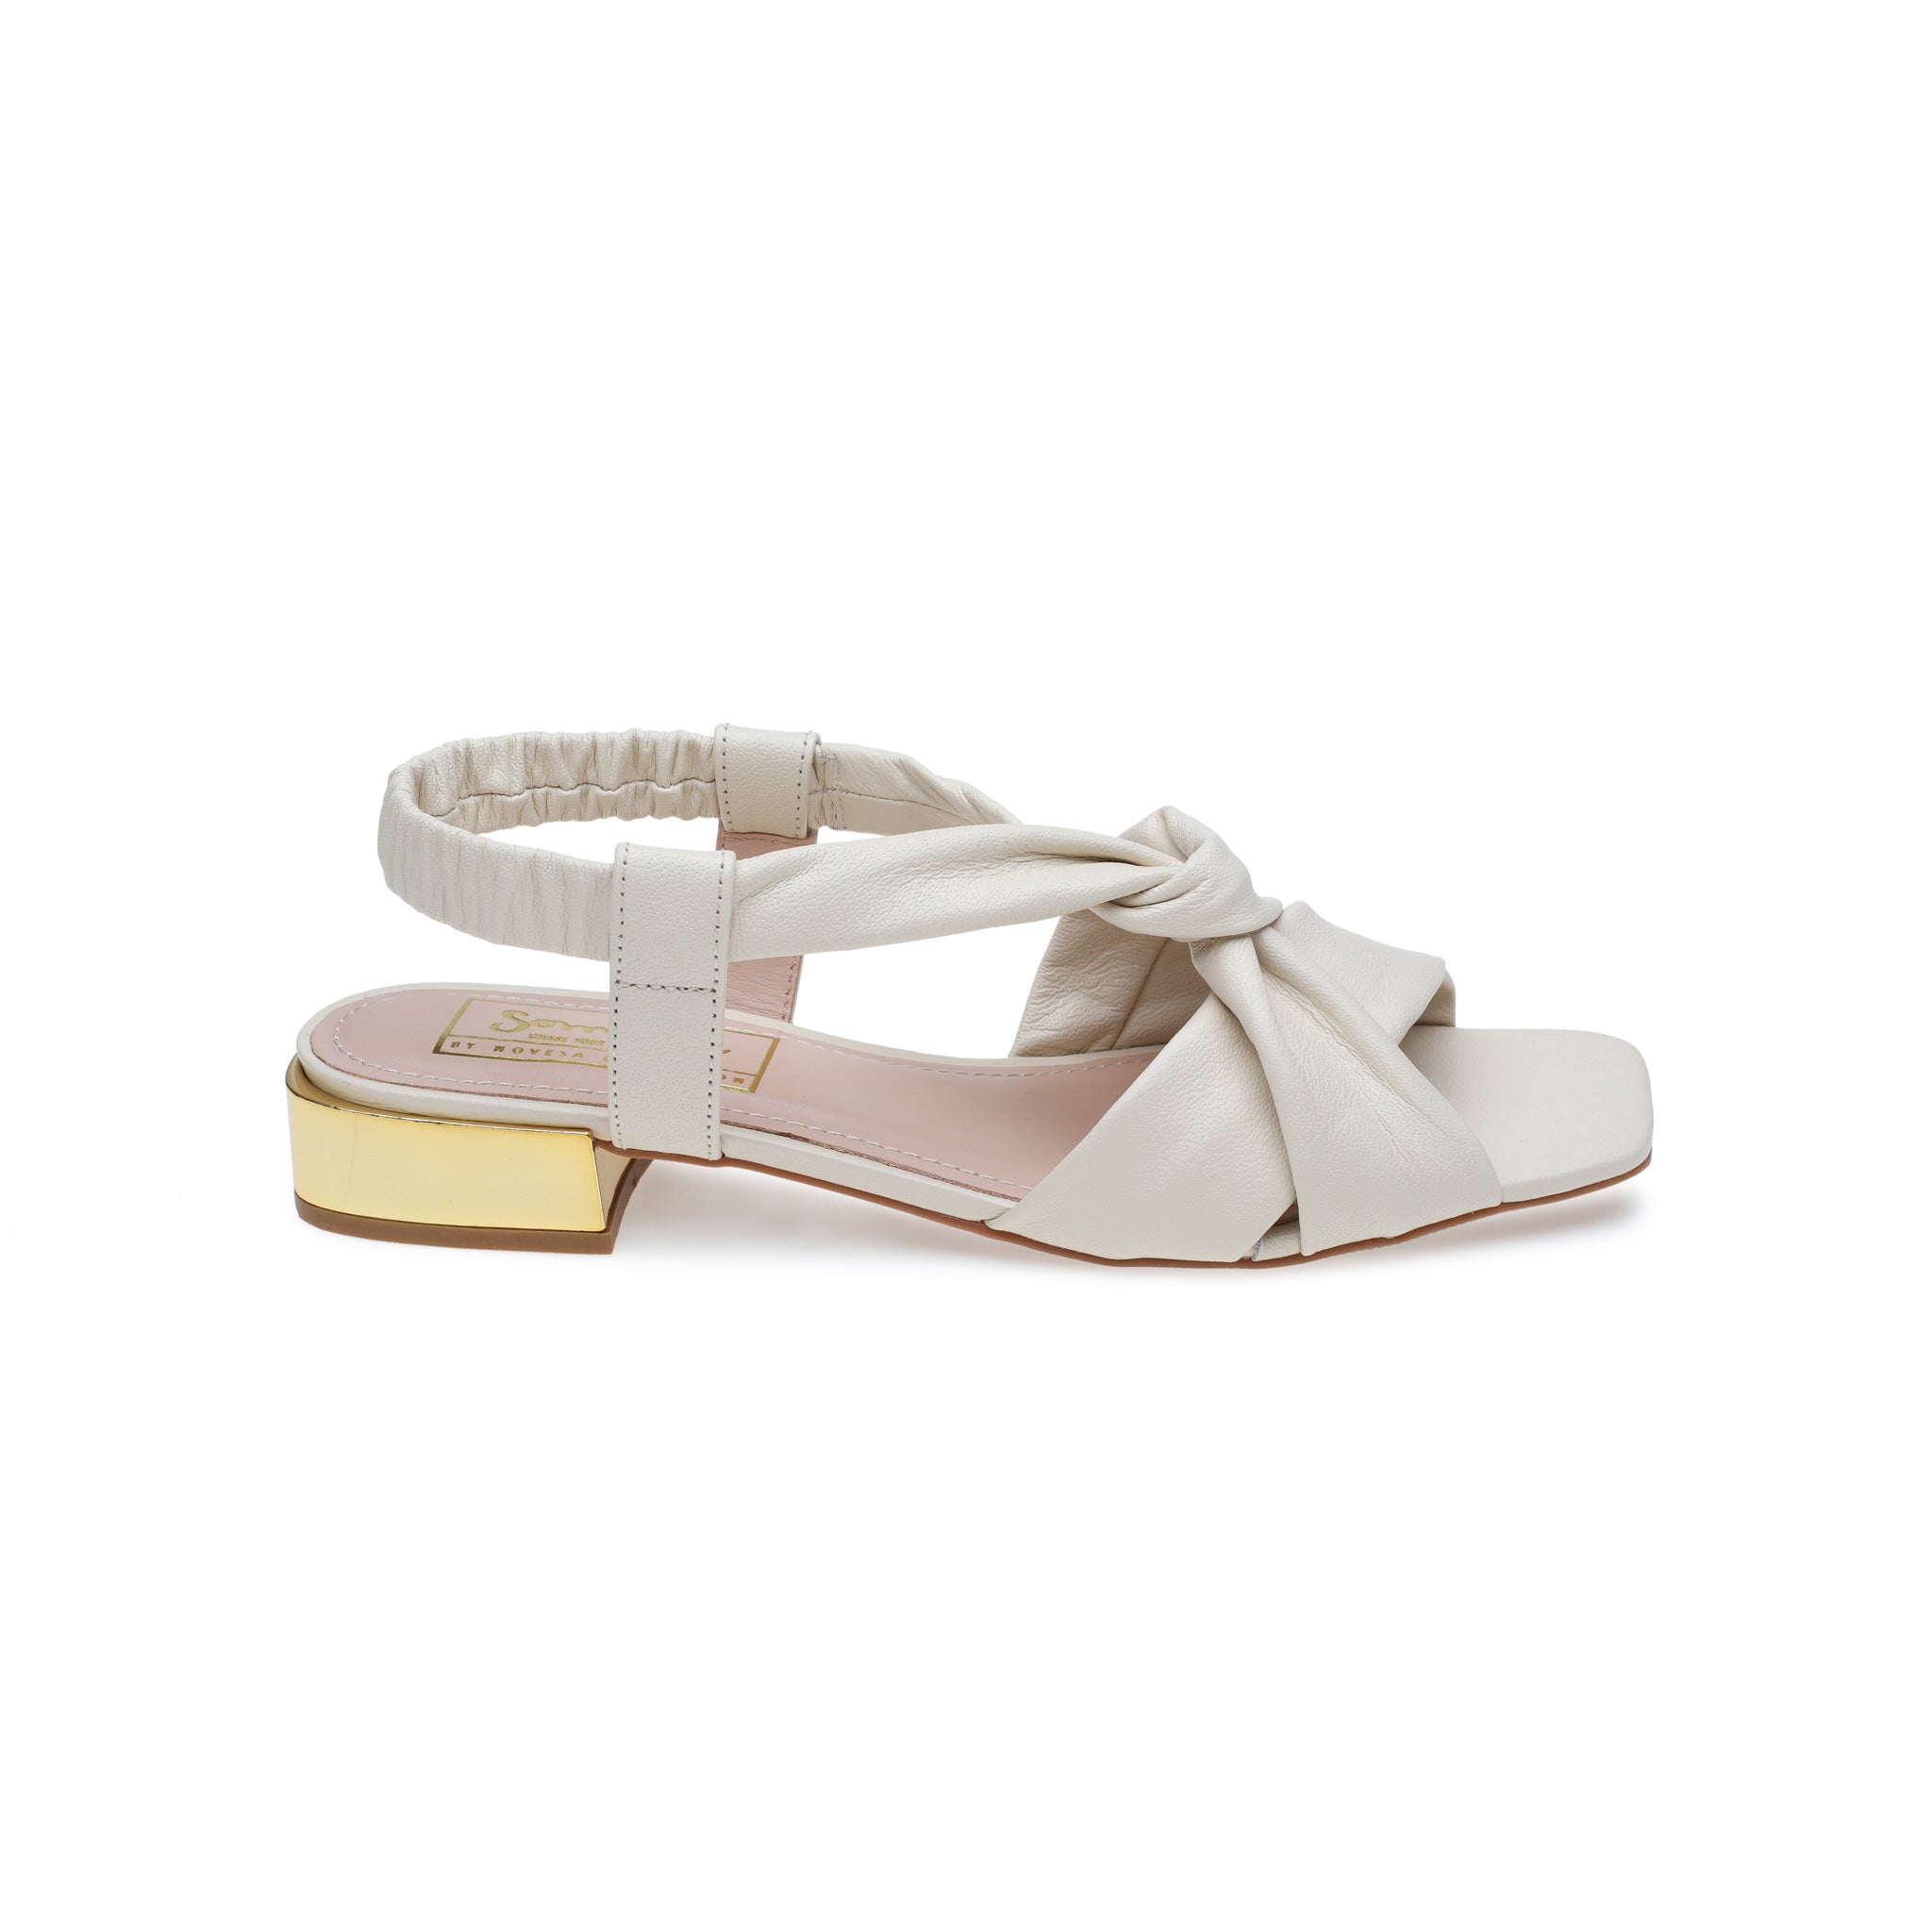 Off White Leather Cross Over Sandals with Gold Heel